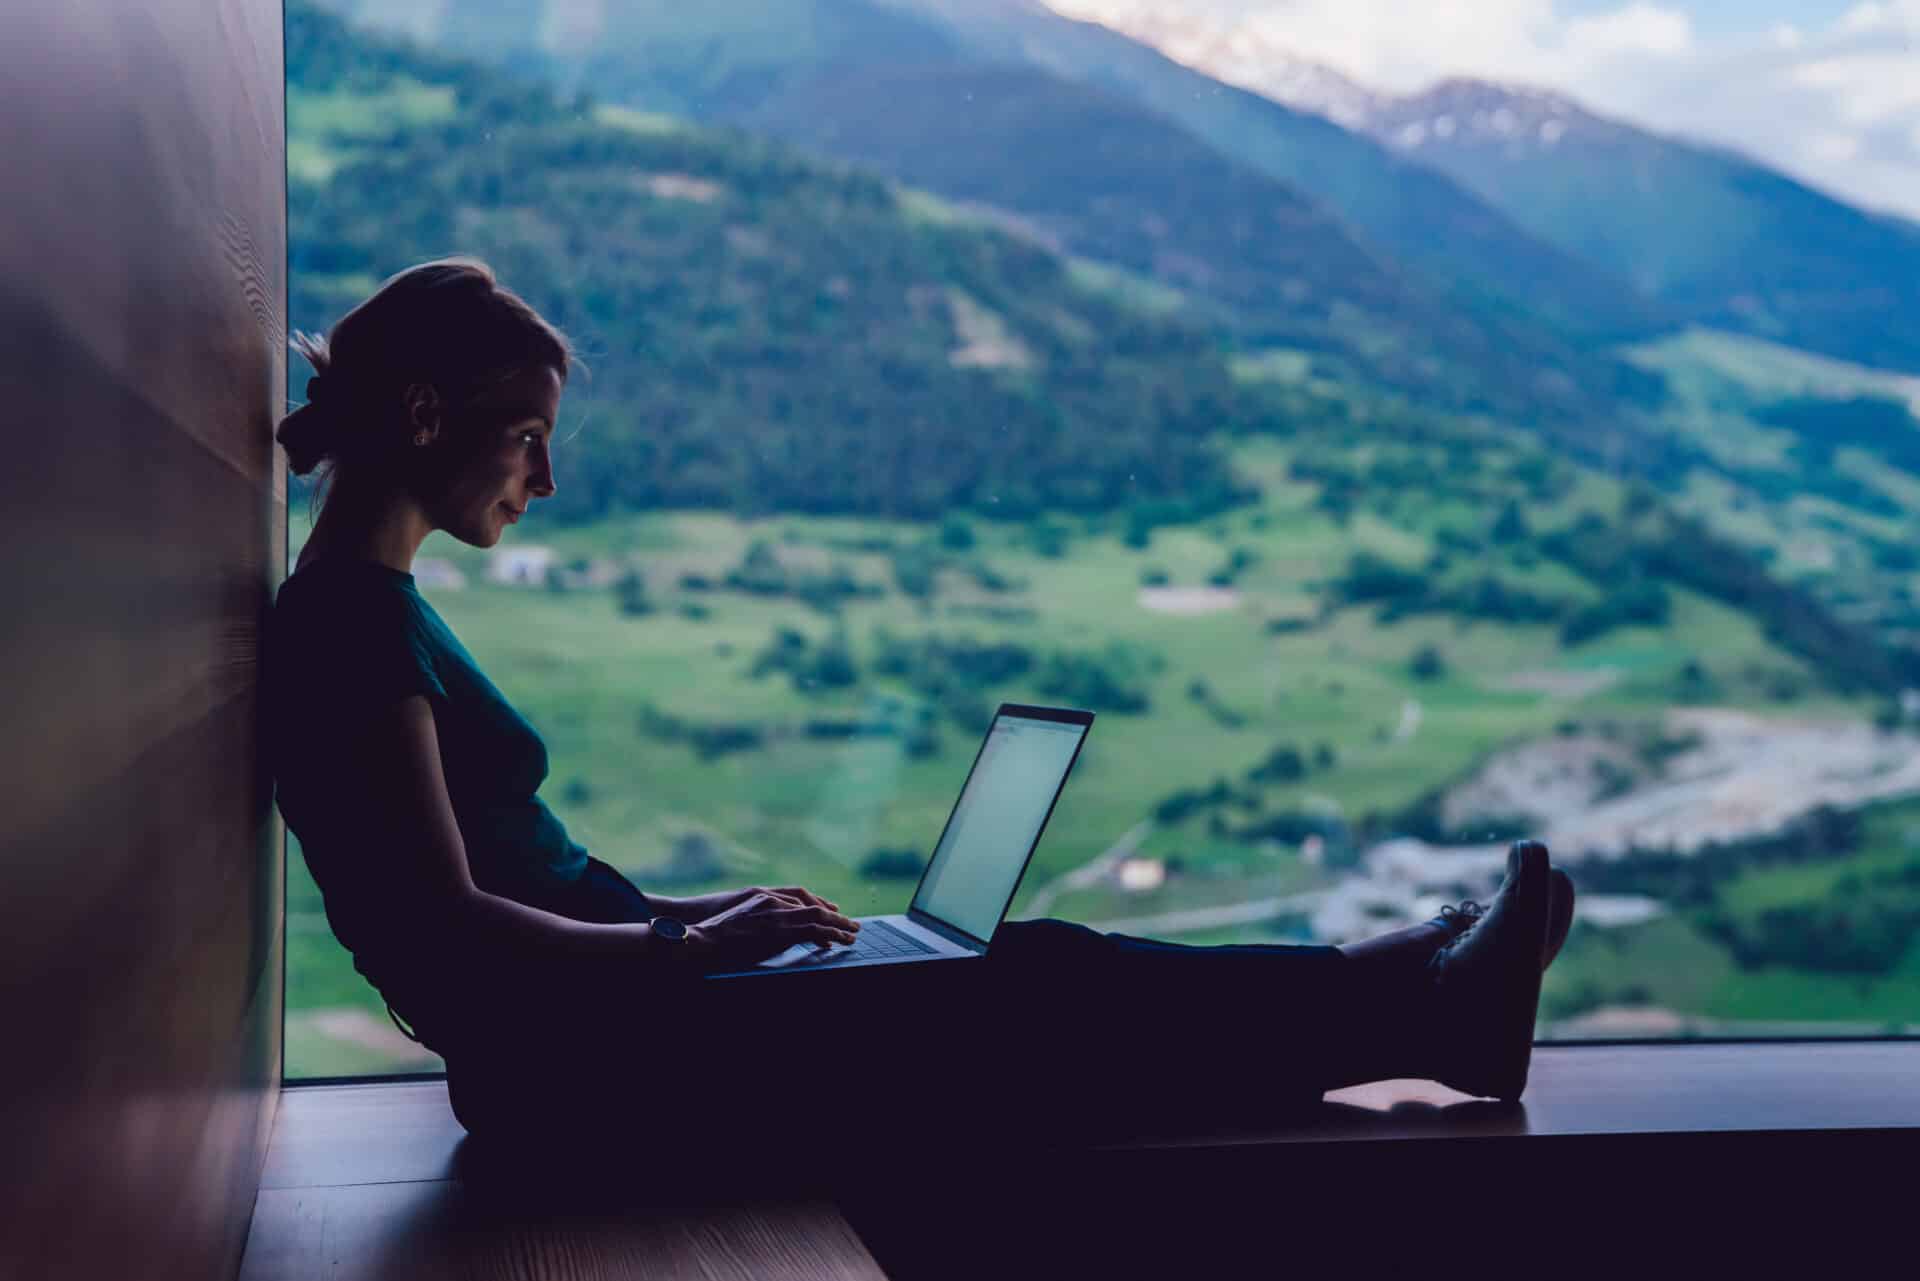 Being a digital nomad means you can work from anywhere